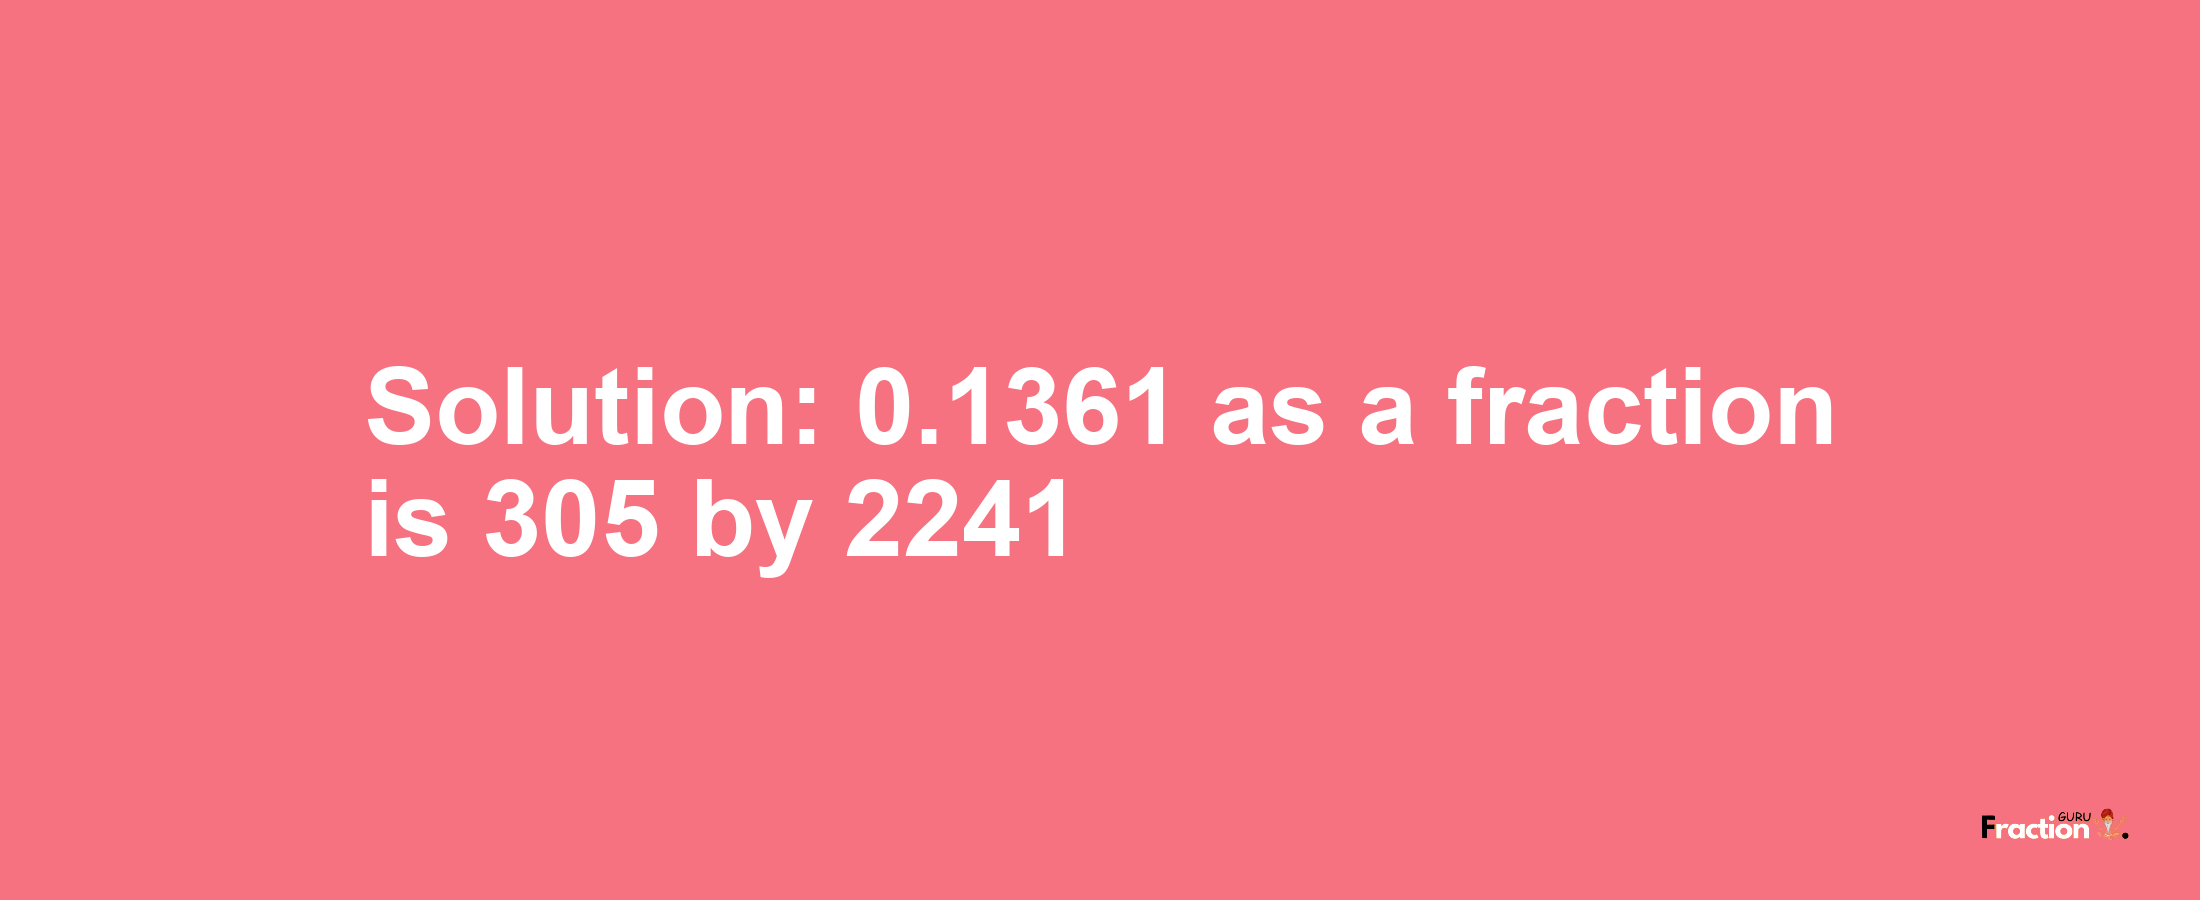 Solution:0.1361 as a fraction is 305/2241